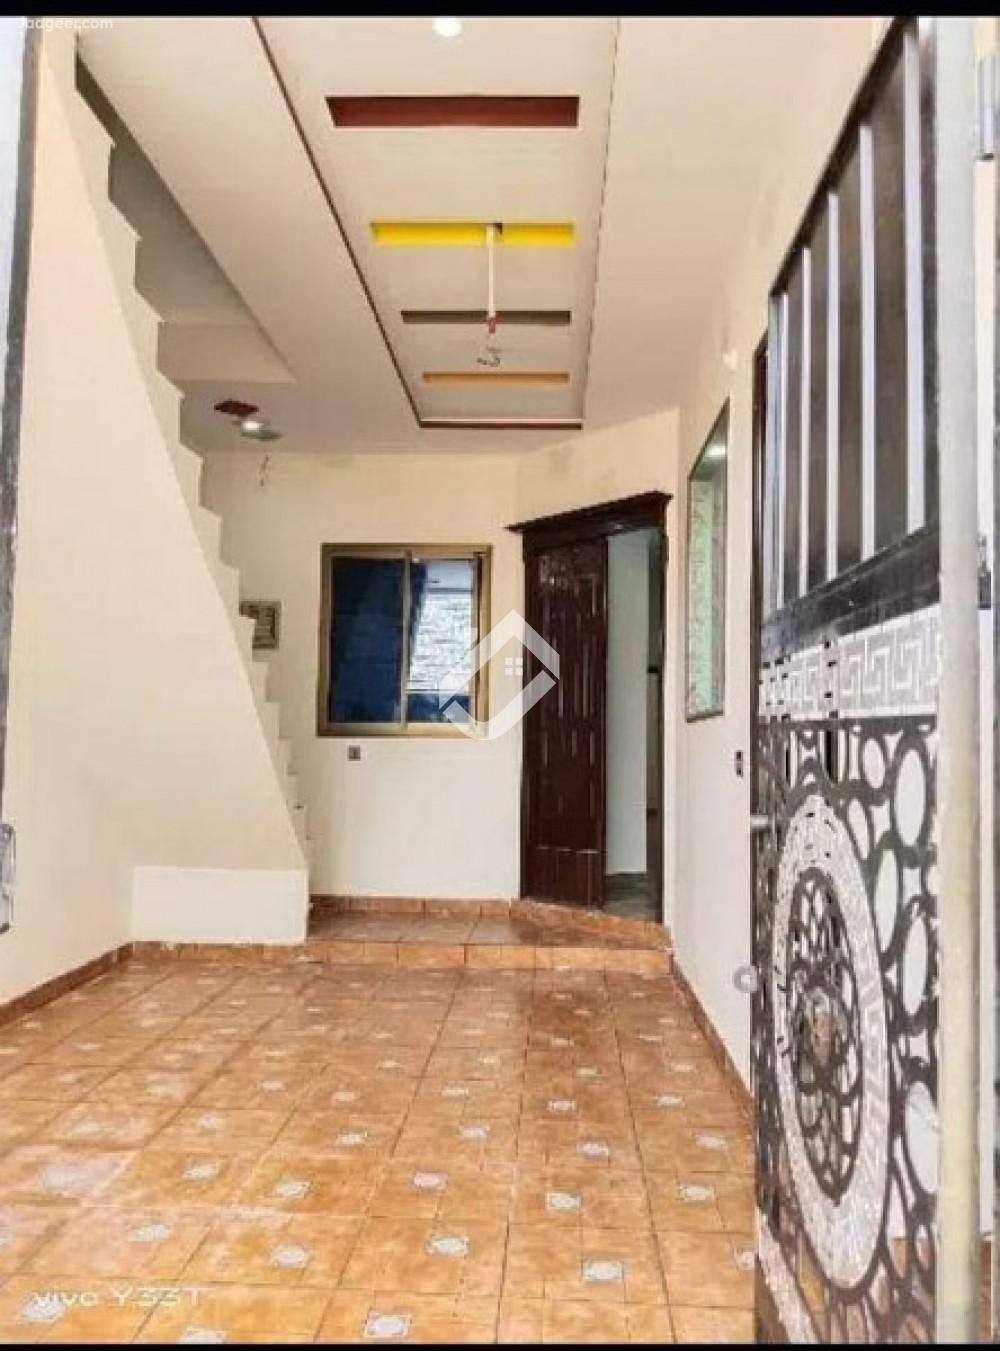 View  5 Marla Double Storey House For Sale In Iqbal Colony City Road  in Iqbal Colony, Sargodha